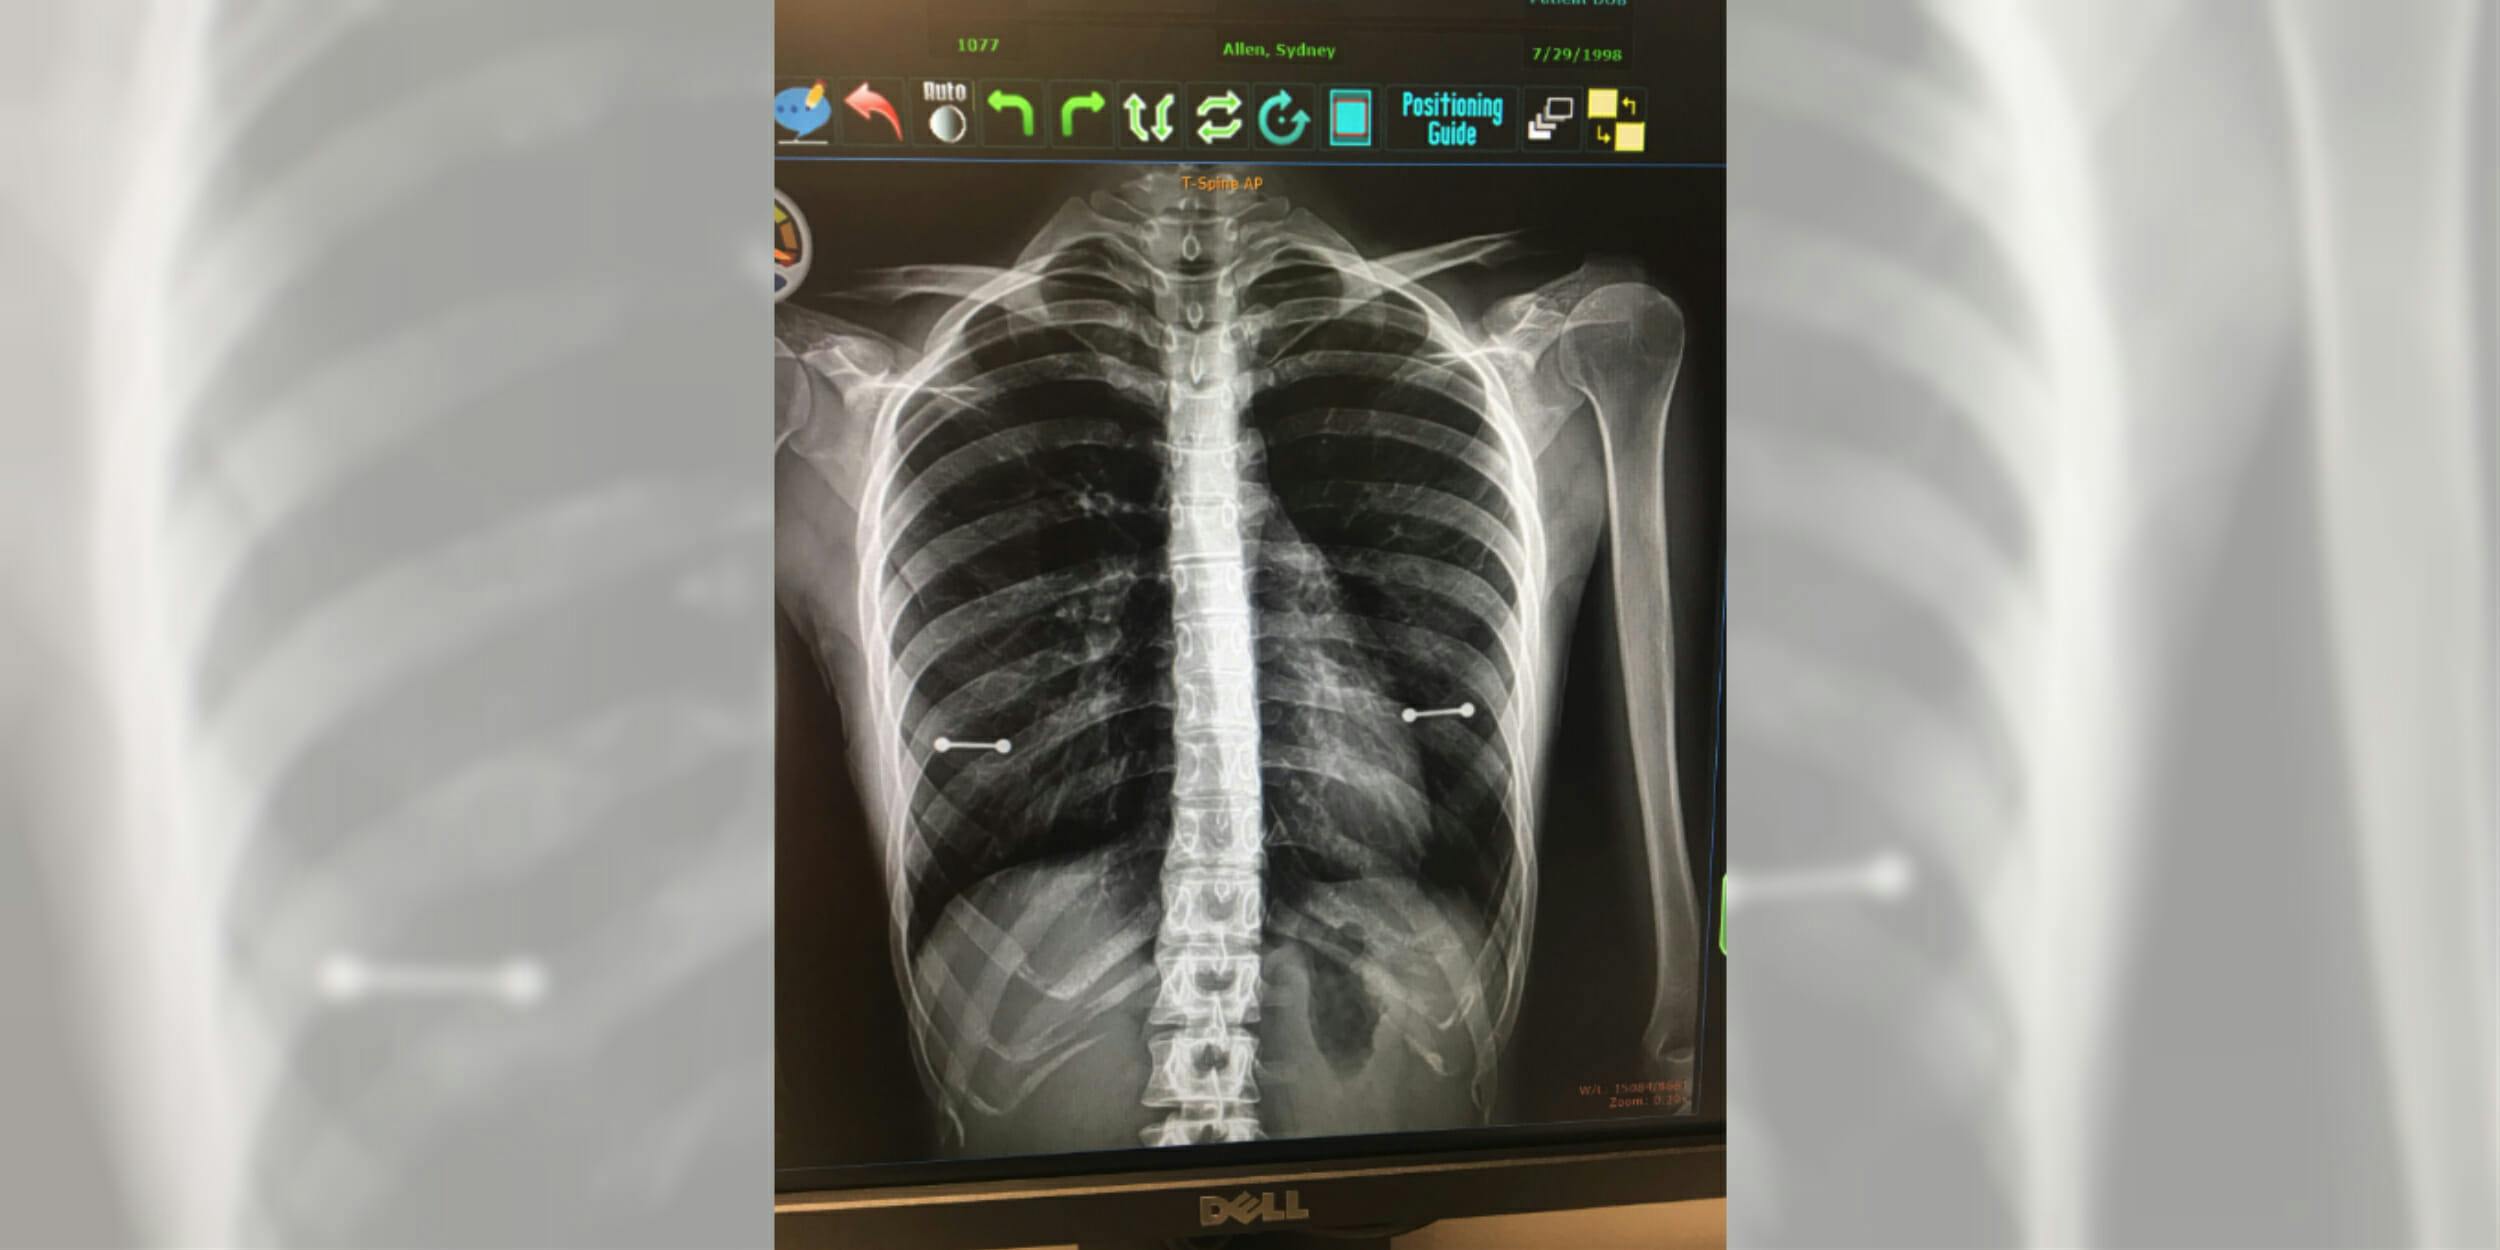 Mom learns of her 20-year-old daughter’s nipple piercings from an X-ray